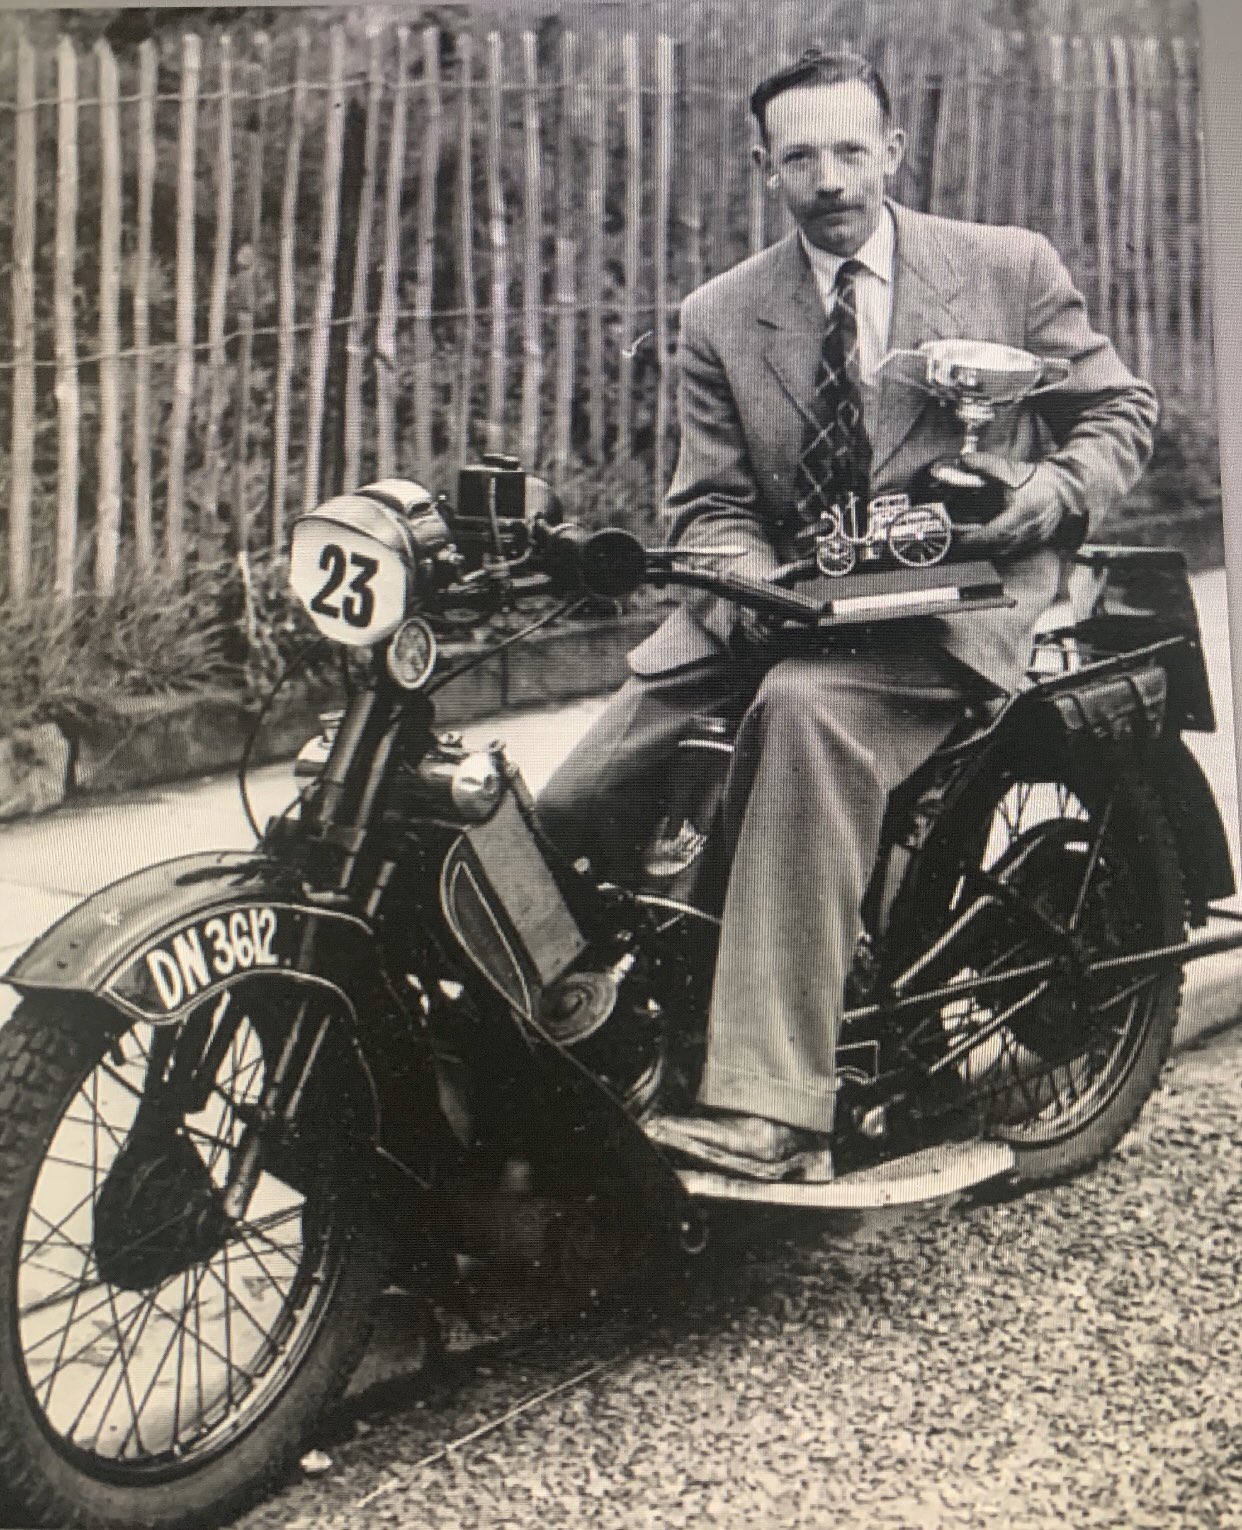 After his time in the army, Captain Tom Moore took part in races on his motorbike across Yorkshire